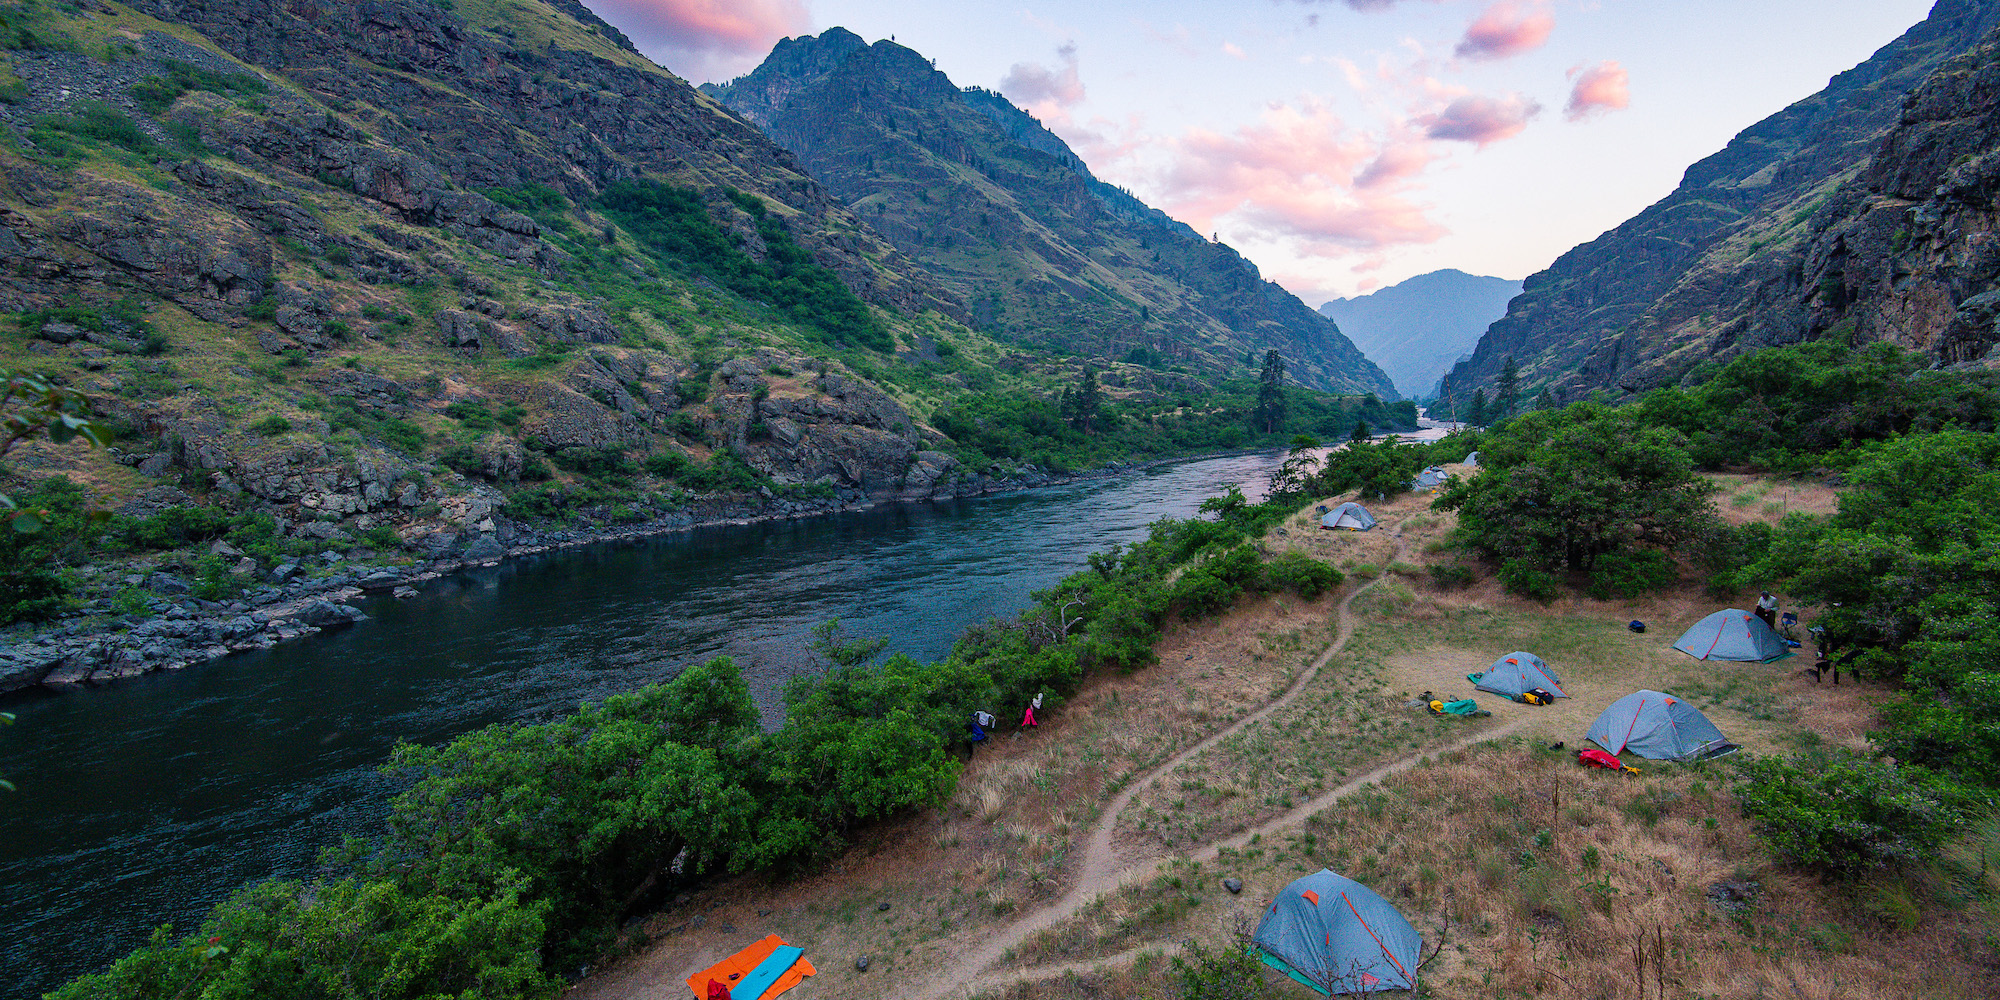 Tents set up at a campsite along the Snake River at sunset